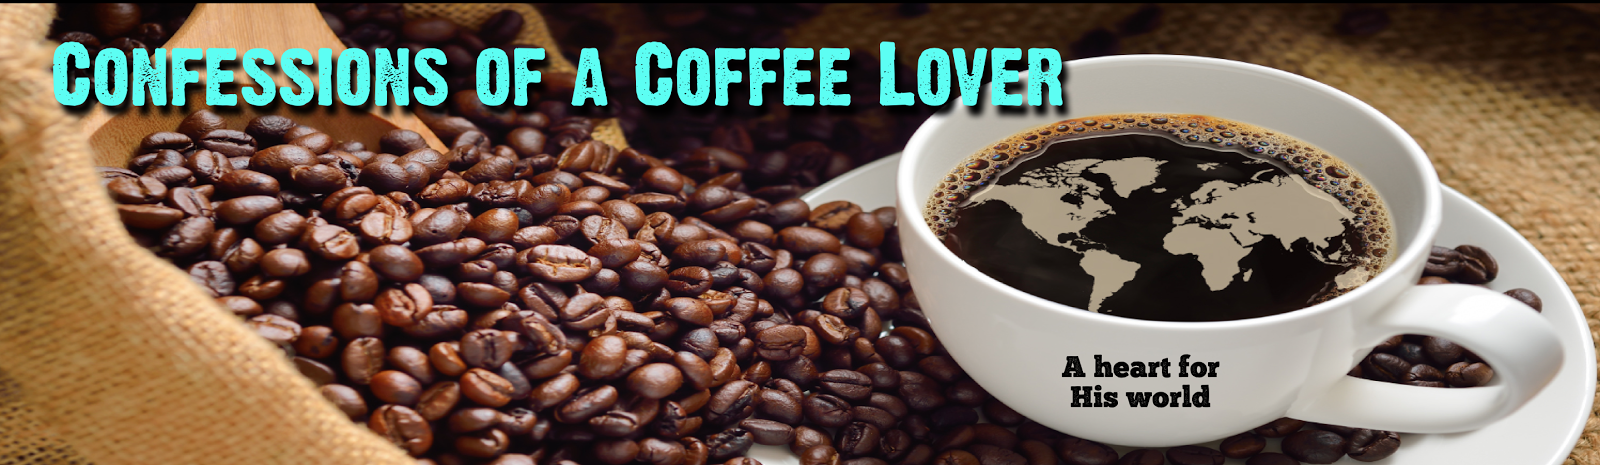 Confessions of a Coffee Lover